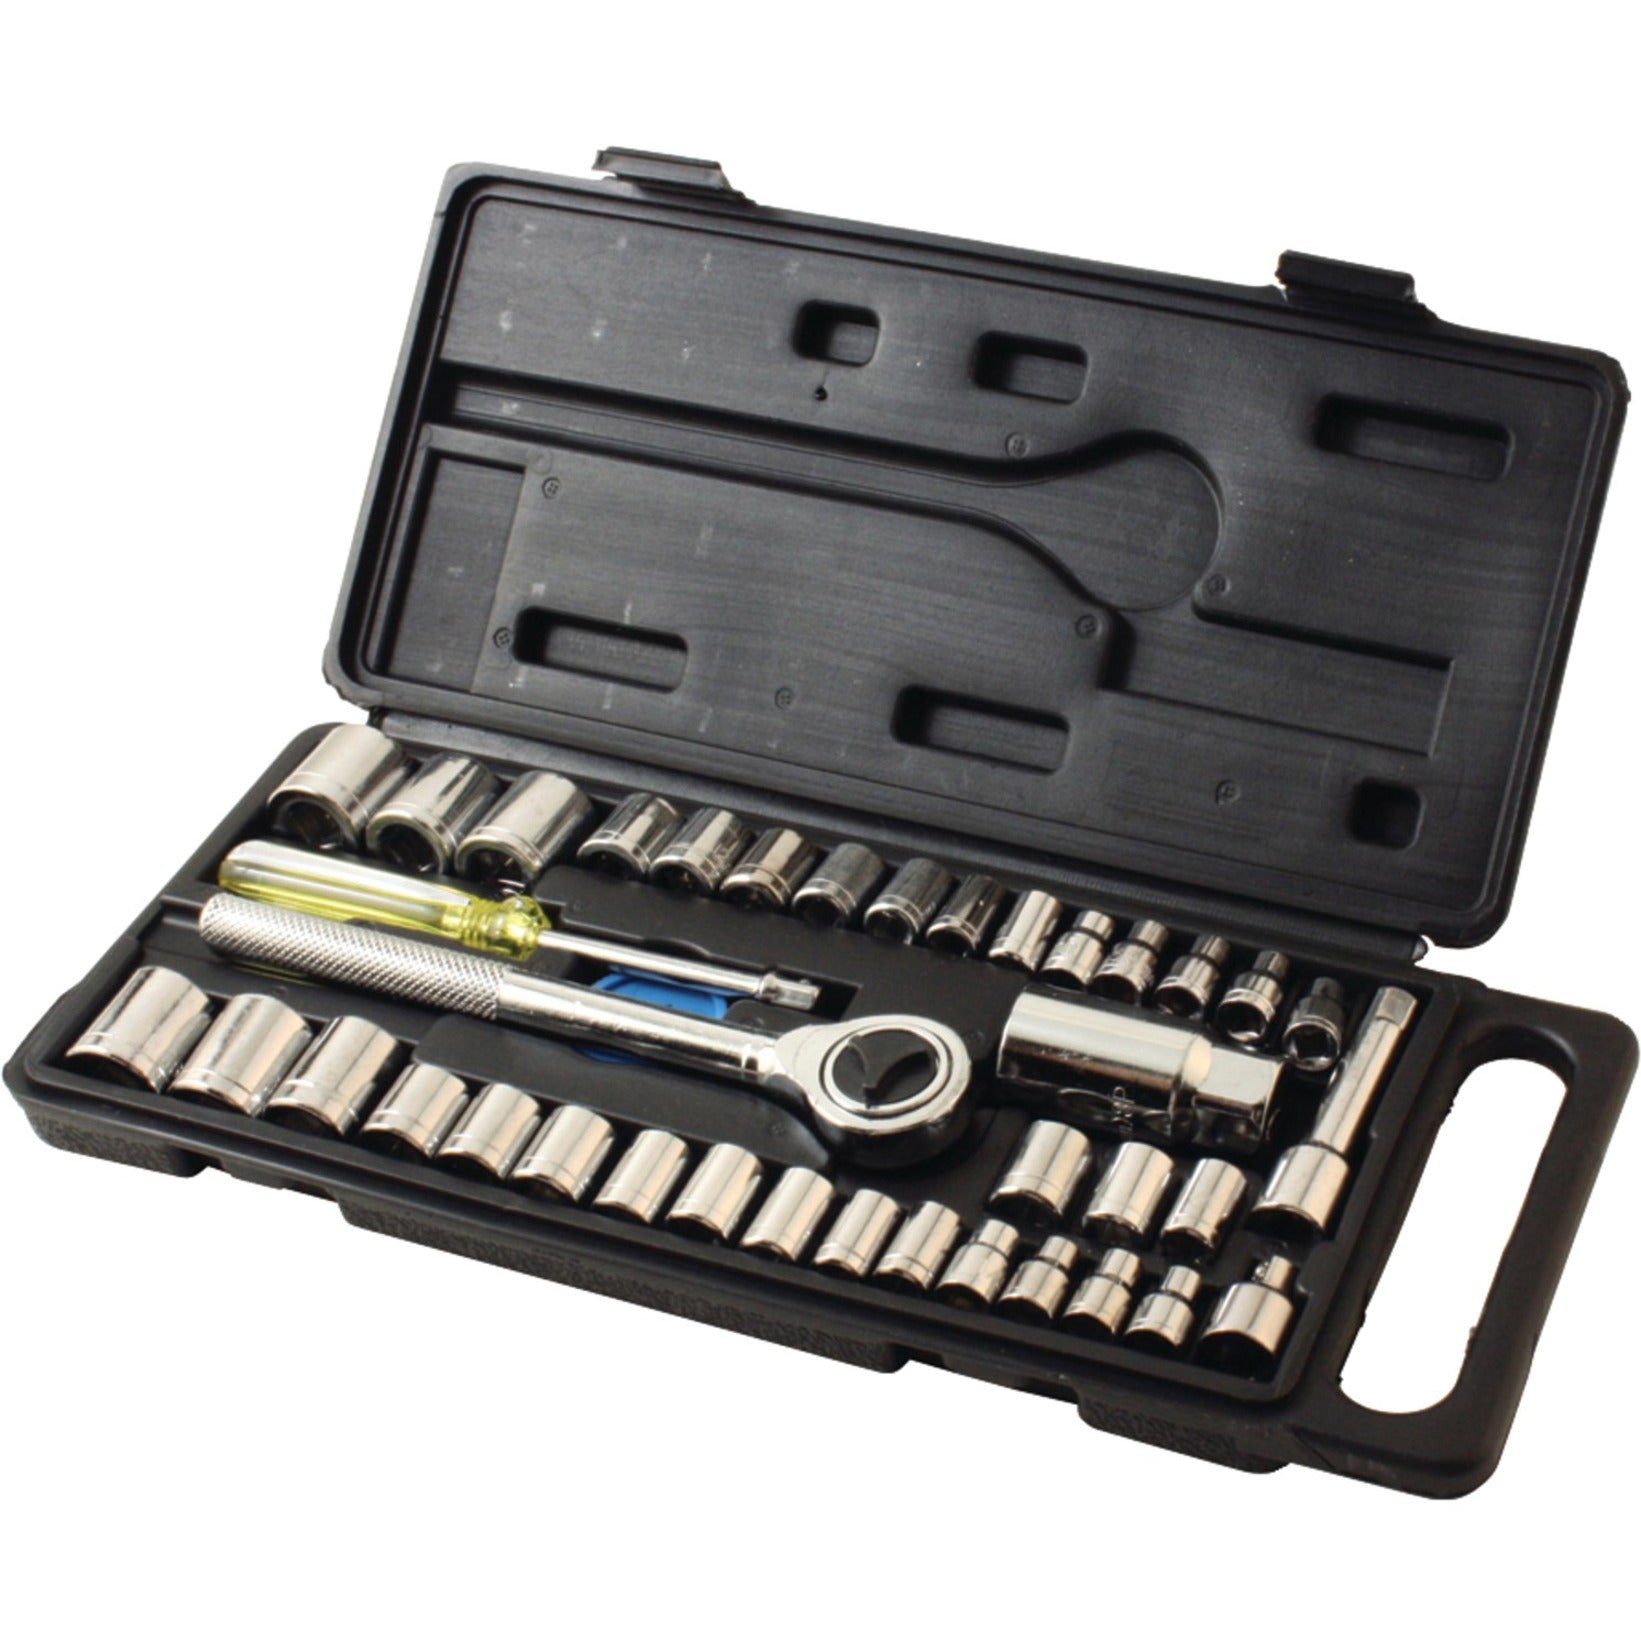 HB Smith 40-piece Drop-forged Socket Set [Discontinued]